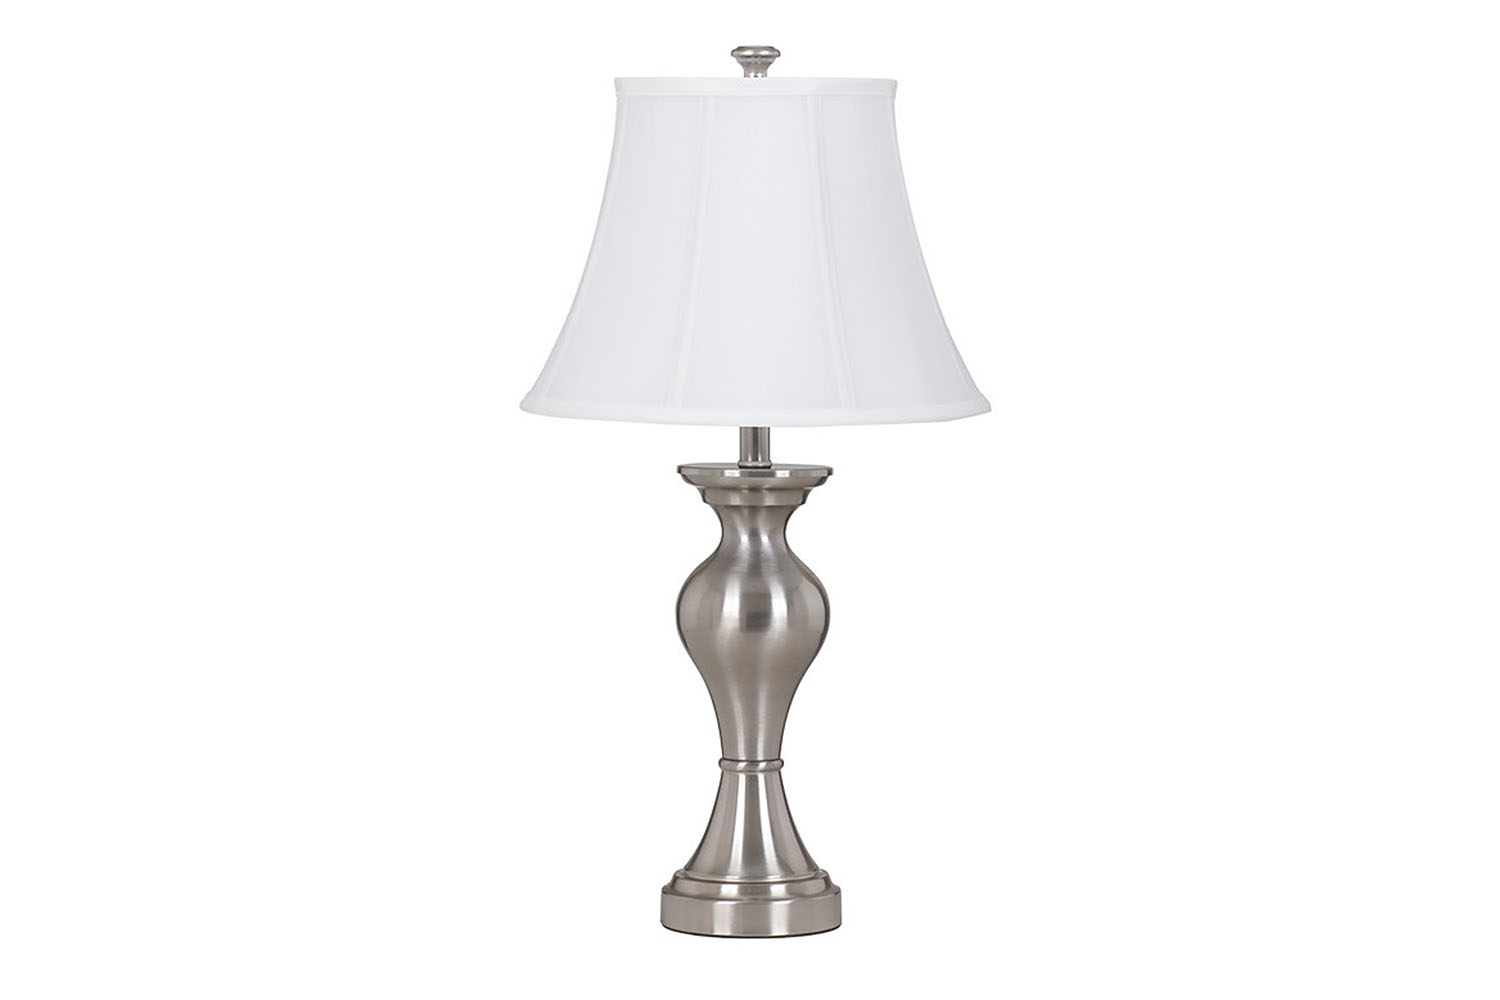 Rishona lamp silve stand with white light shade.